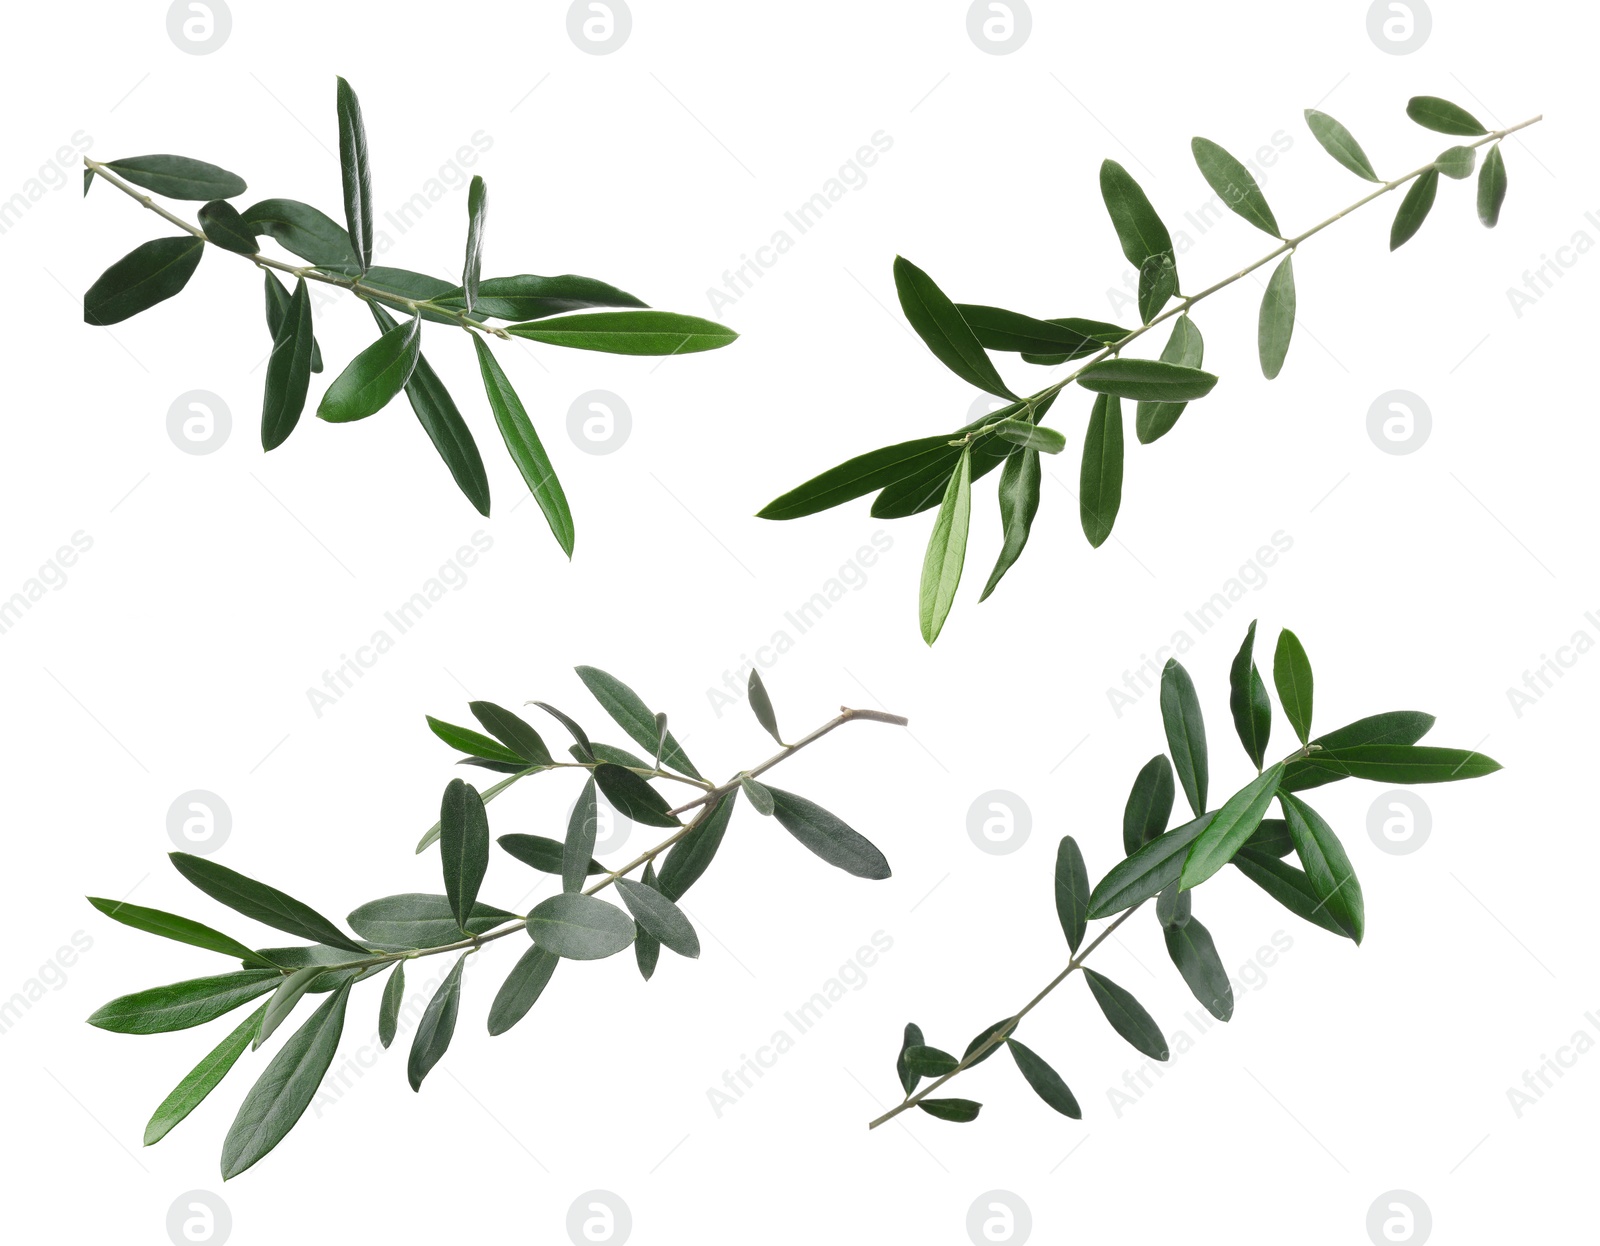 Image of Set of olive twigs with fresh green leaves on white background